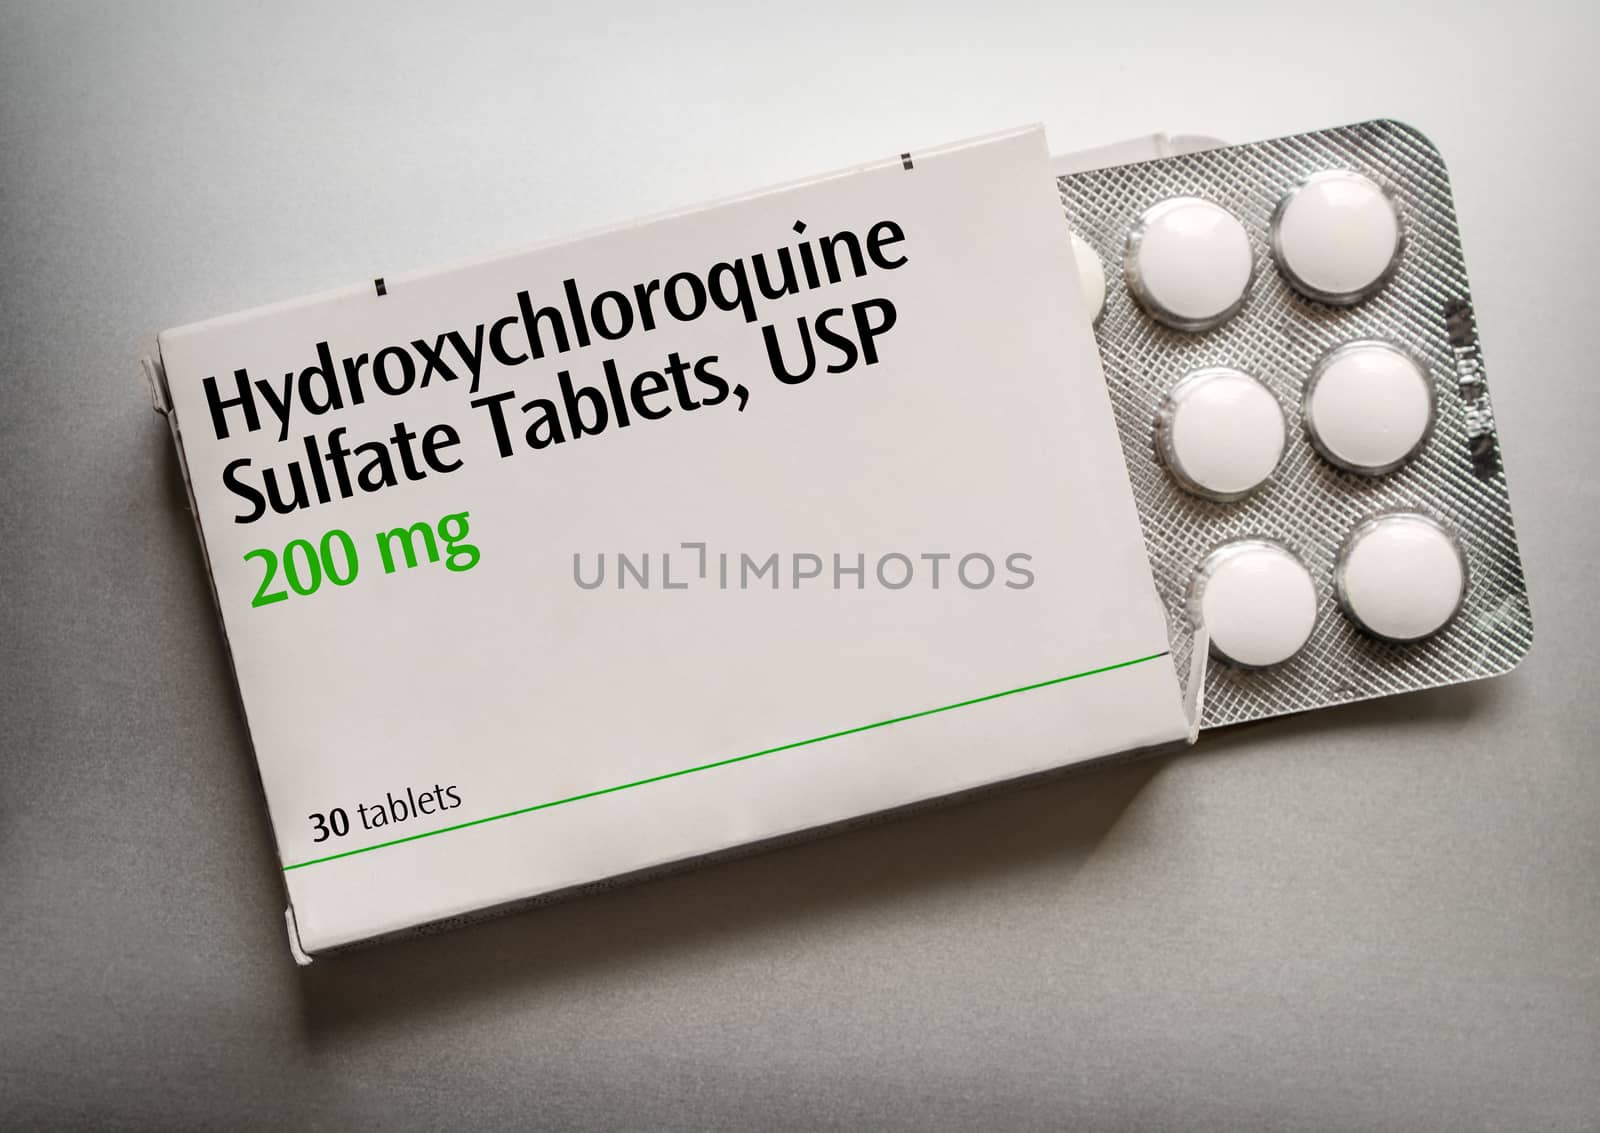 Hydroxychloroquine Tablets (artistic rendering) by mbruxelle